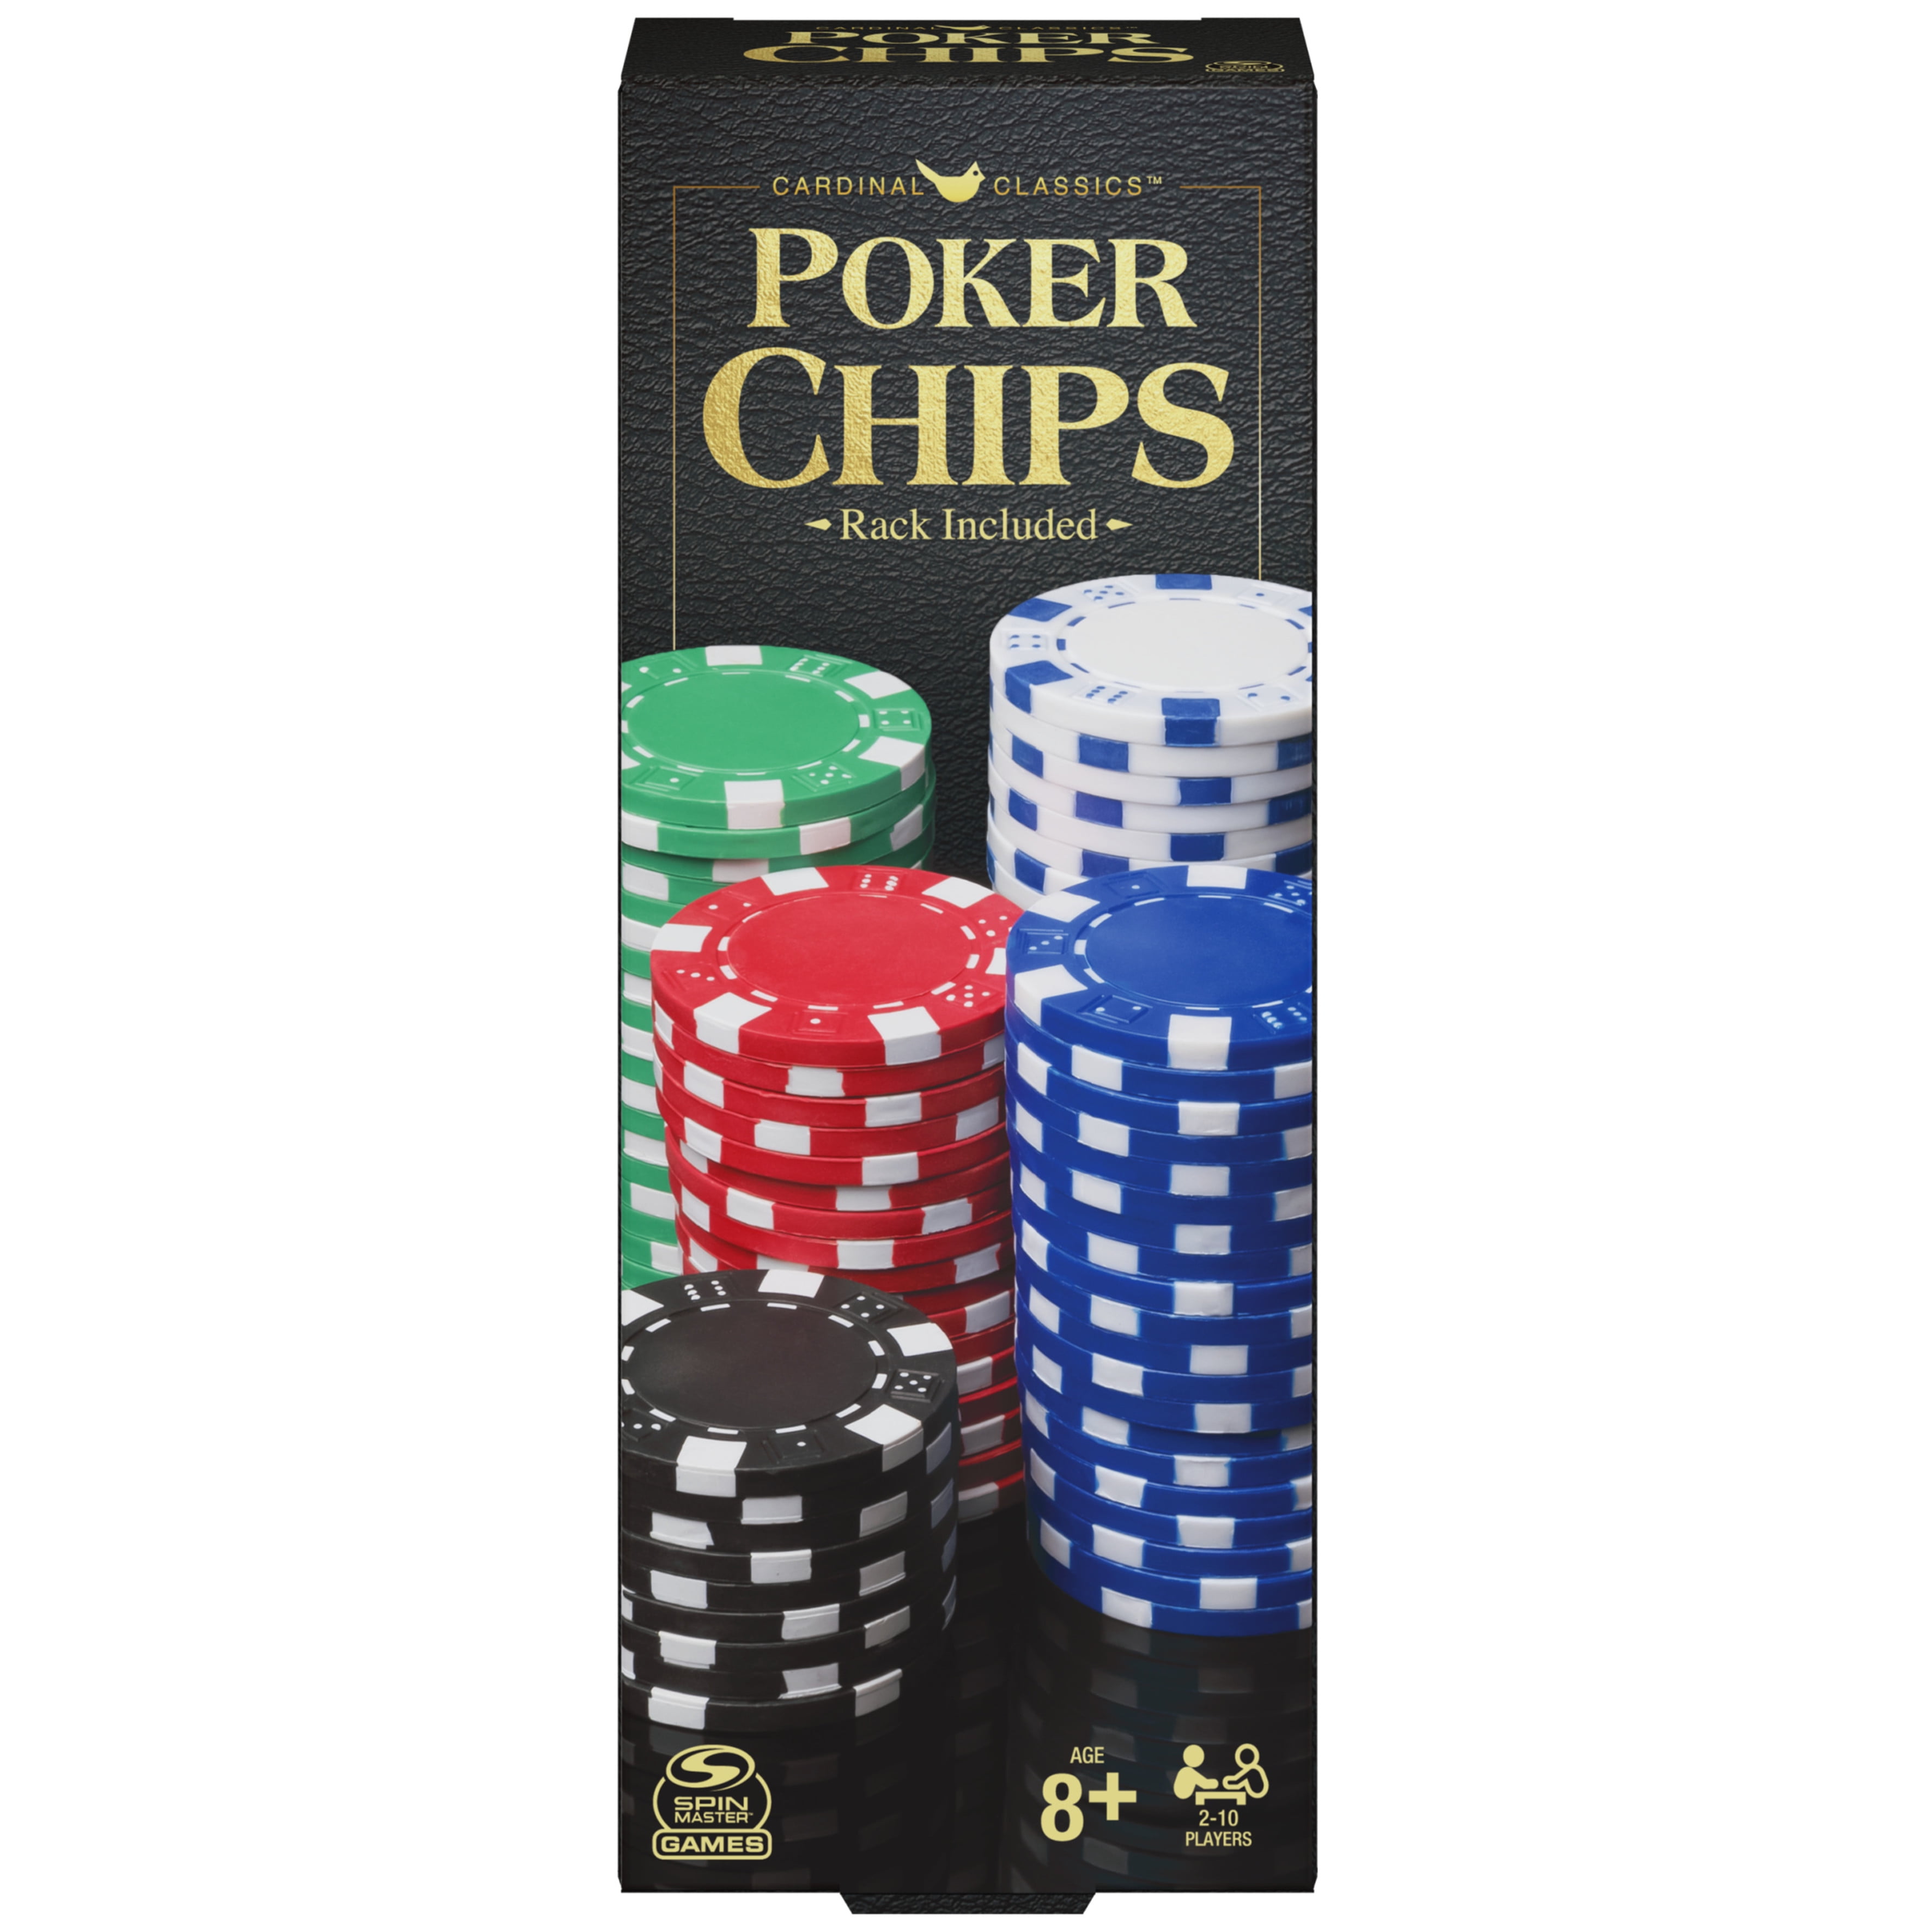 The Game of Choice TEXAS HOLD'EM gold colored Poker Card Guard Protector 